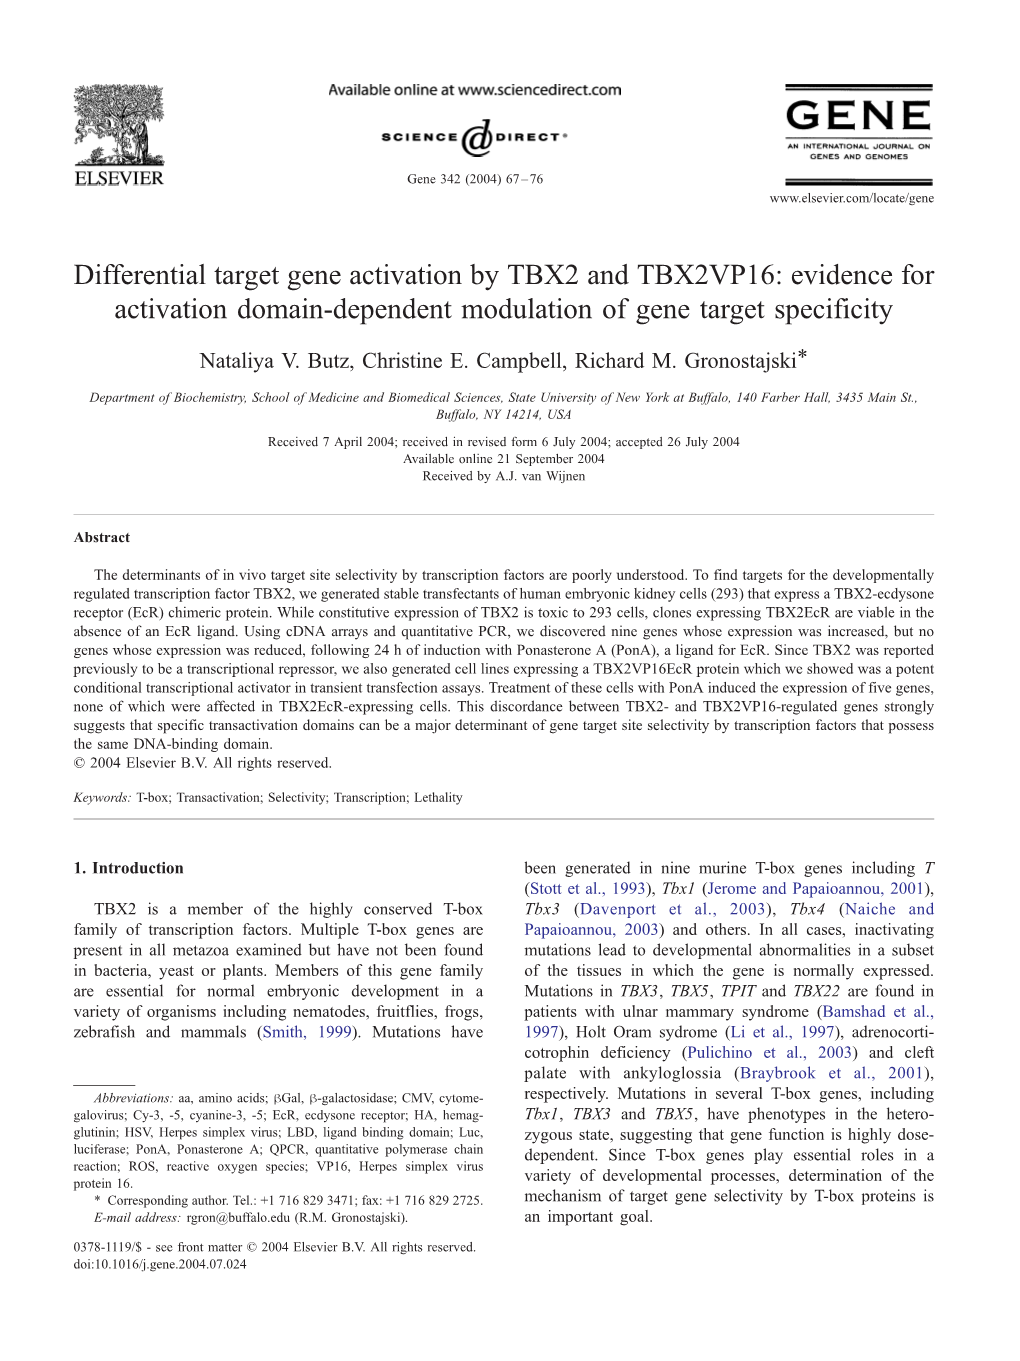 Differential Target Gene Activation by TBX2 and TBX2VP16: Evidence for Activation Domain-Dependent Modulation of Gene Target Specificity